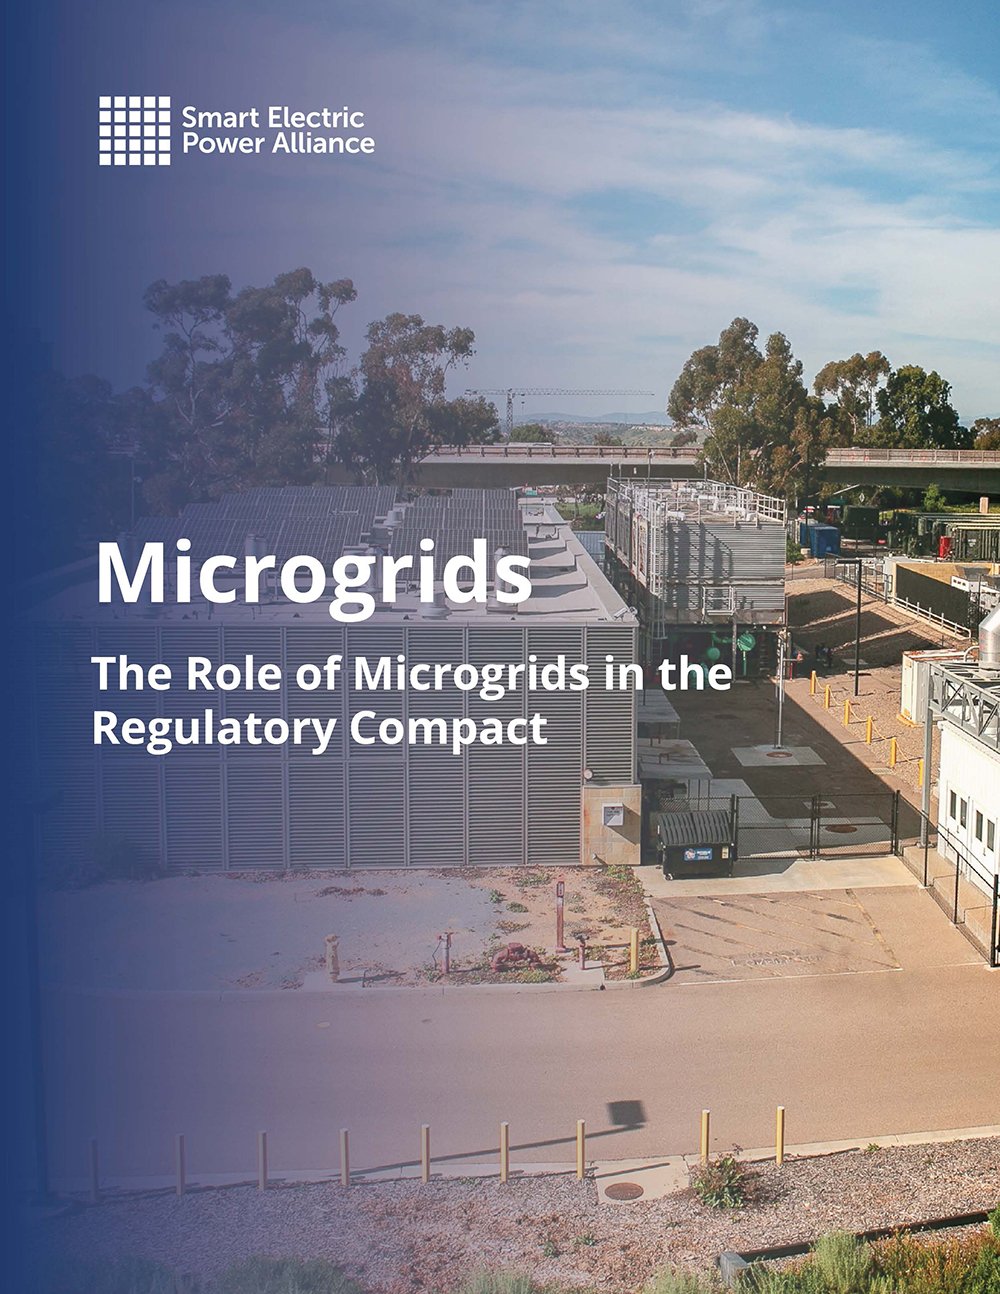 Microgrids – The Role of Microgrids in the Regulatory Compact